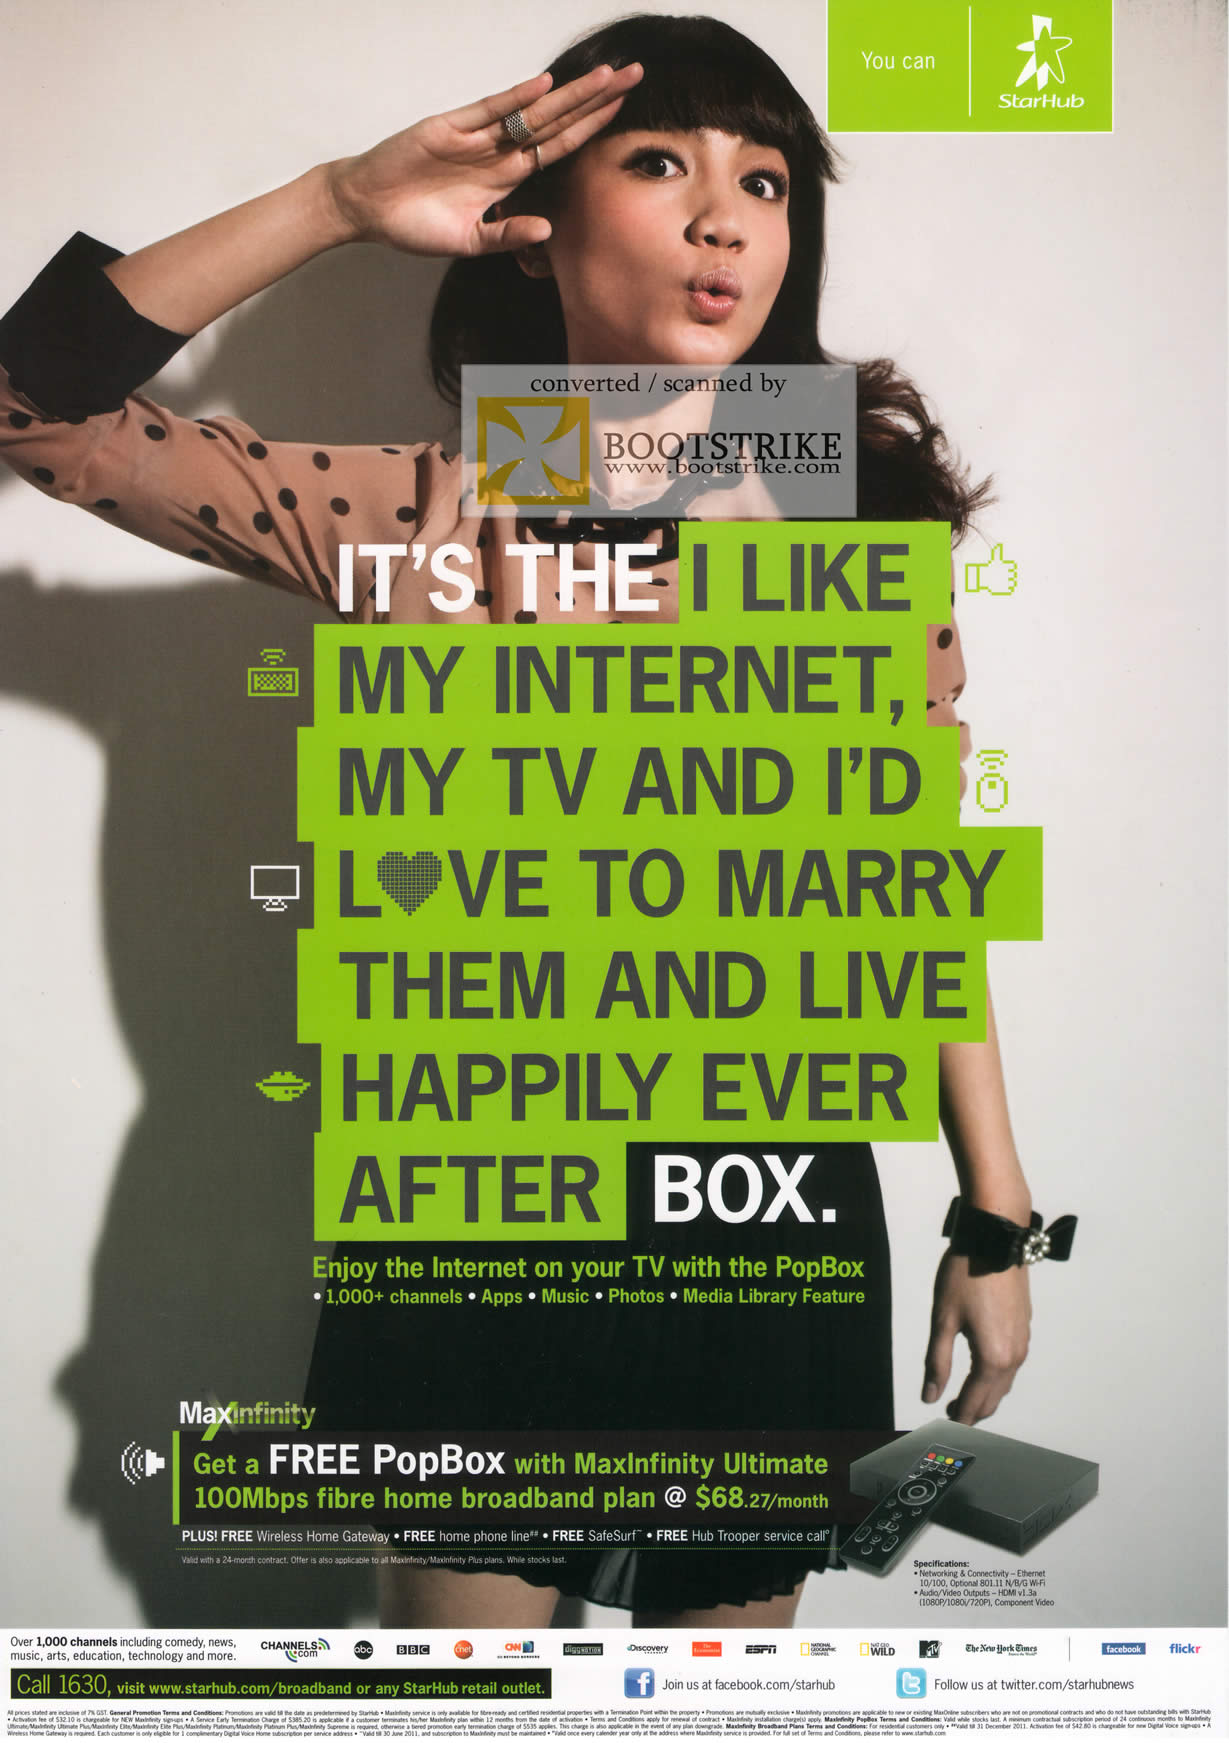 IT Show 2011 price list image brochure of Starhub PopBox MaxInfinity Ultimate 100Mbps Fibre